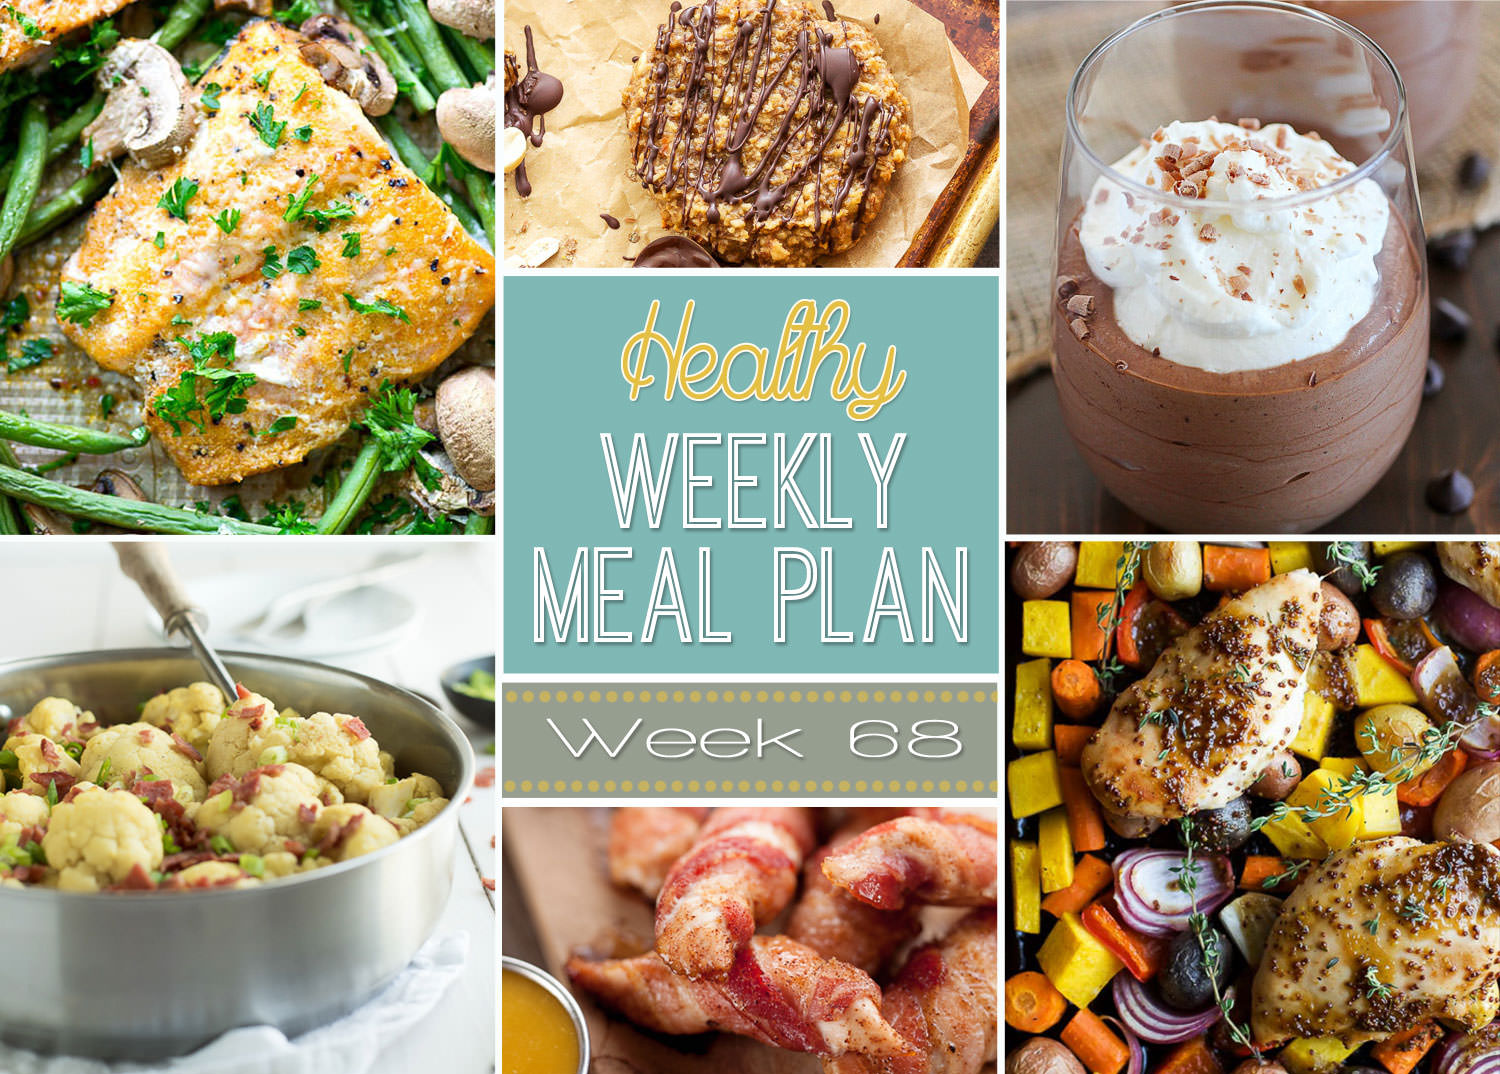 This weeks healthy meal plan is full of comforting dishes, such as Crock Pot Potato Corn Chowder with Roasted Poblanos and Sheet Pan Honey Mustard Chicken! And for dessert, a Chocolate Mousse with only 5 ingredients!